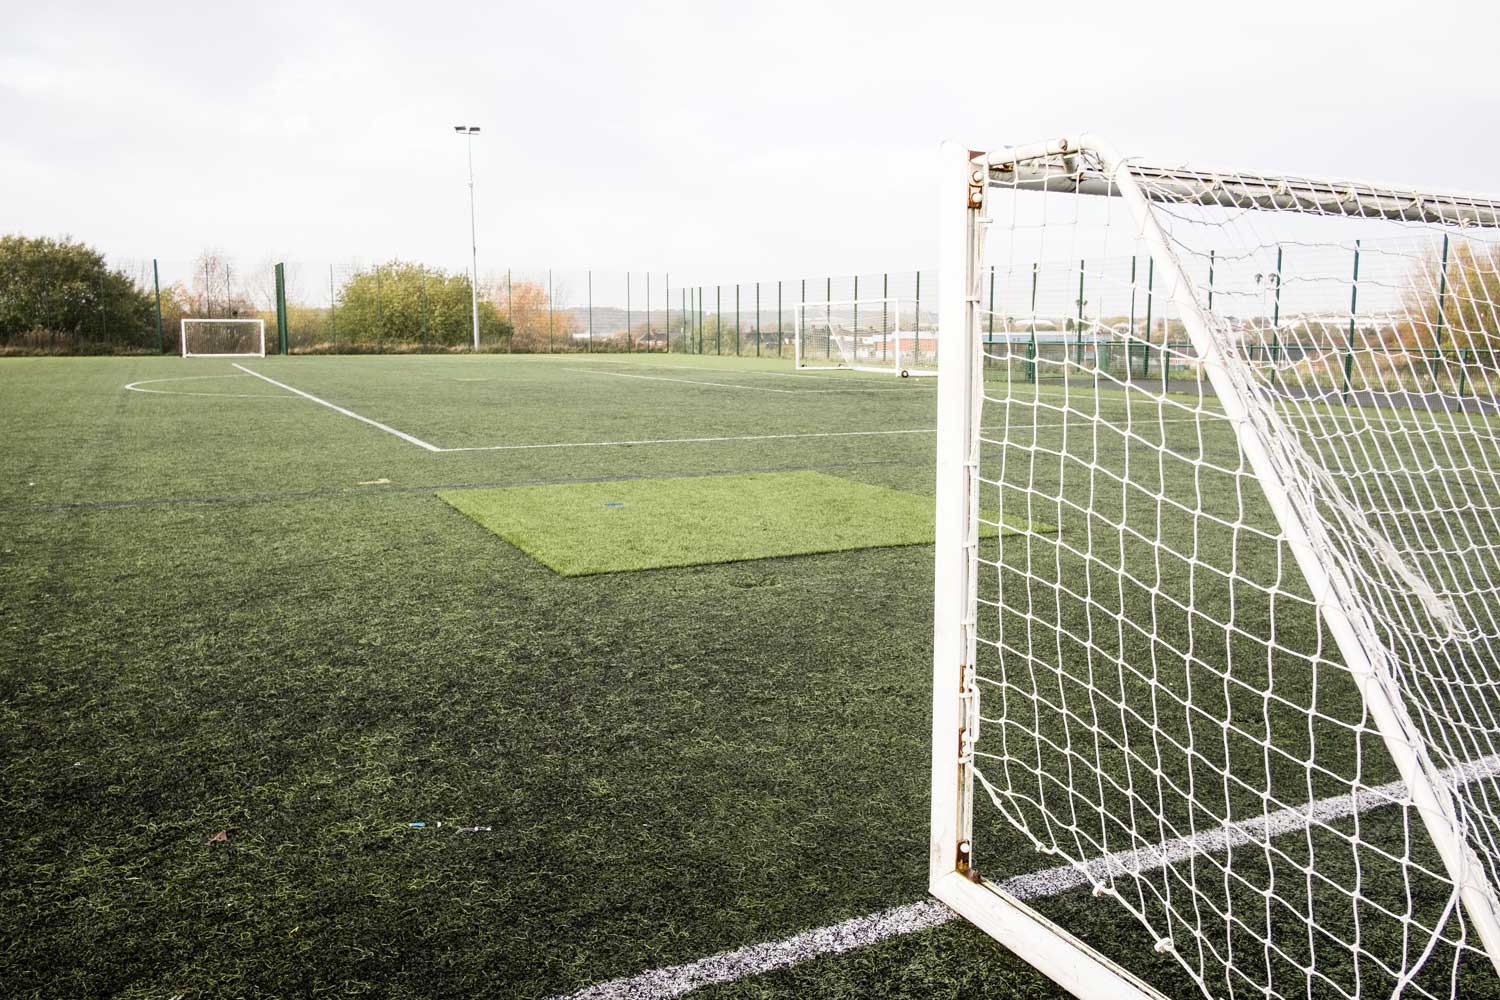 image of goal posts on outdoor fottball pitch